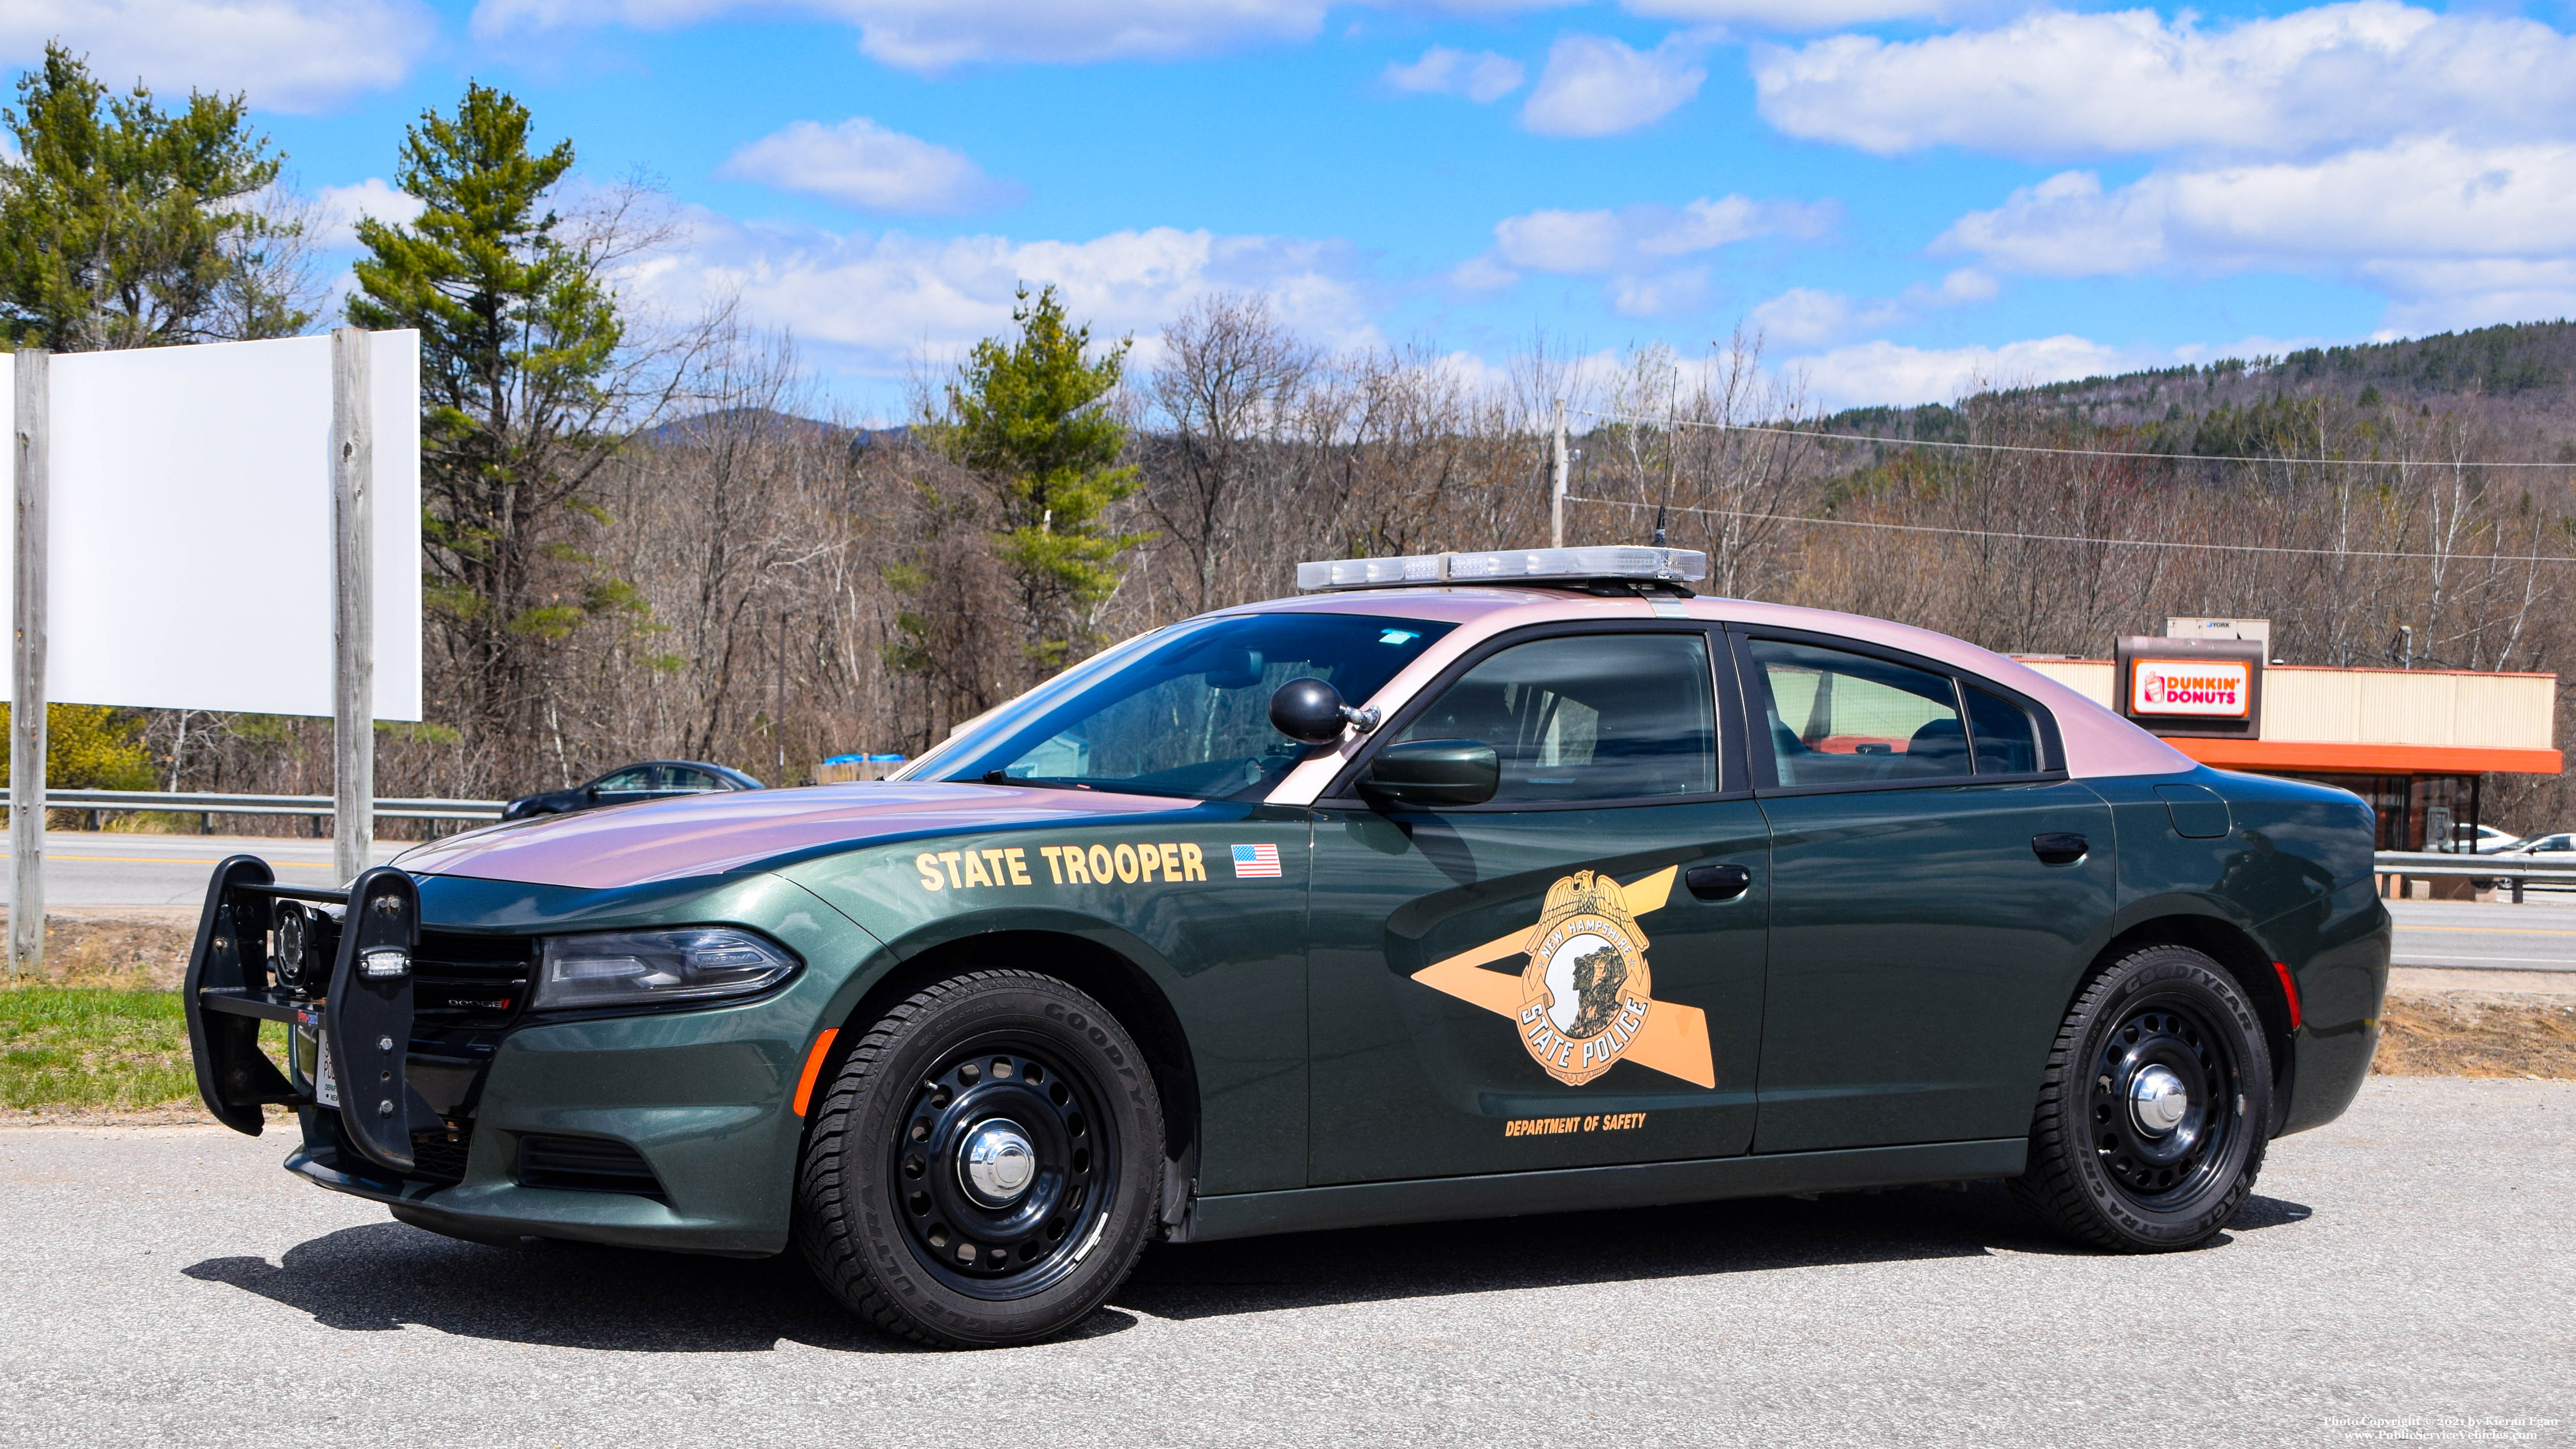 A photo  of New Hampshire State Police
            Cruiser 325, a 2015-2016 Dodge Charger             taken by Kieran Egan